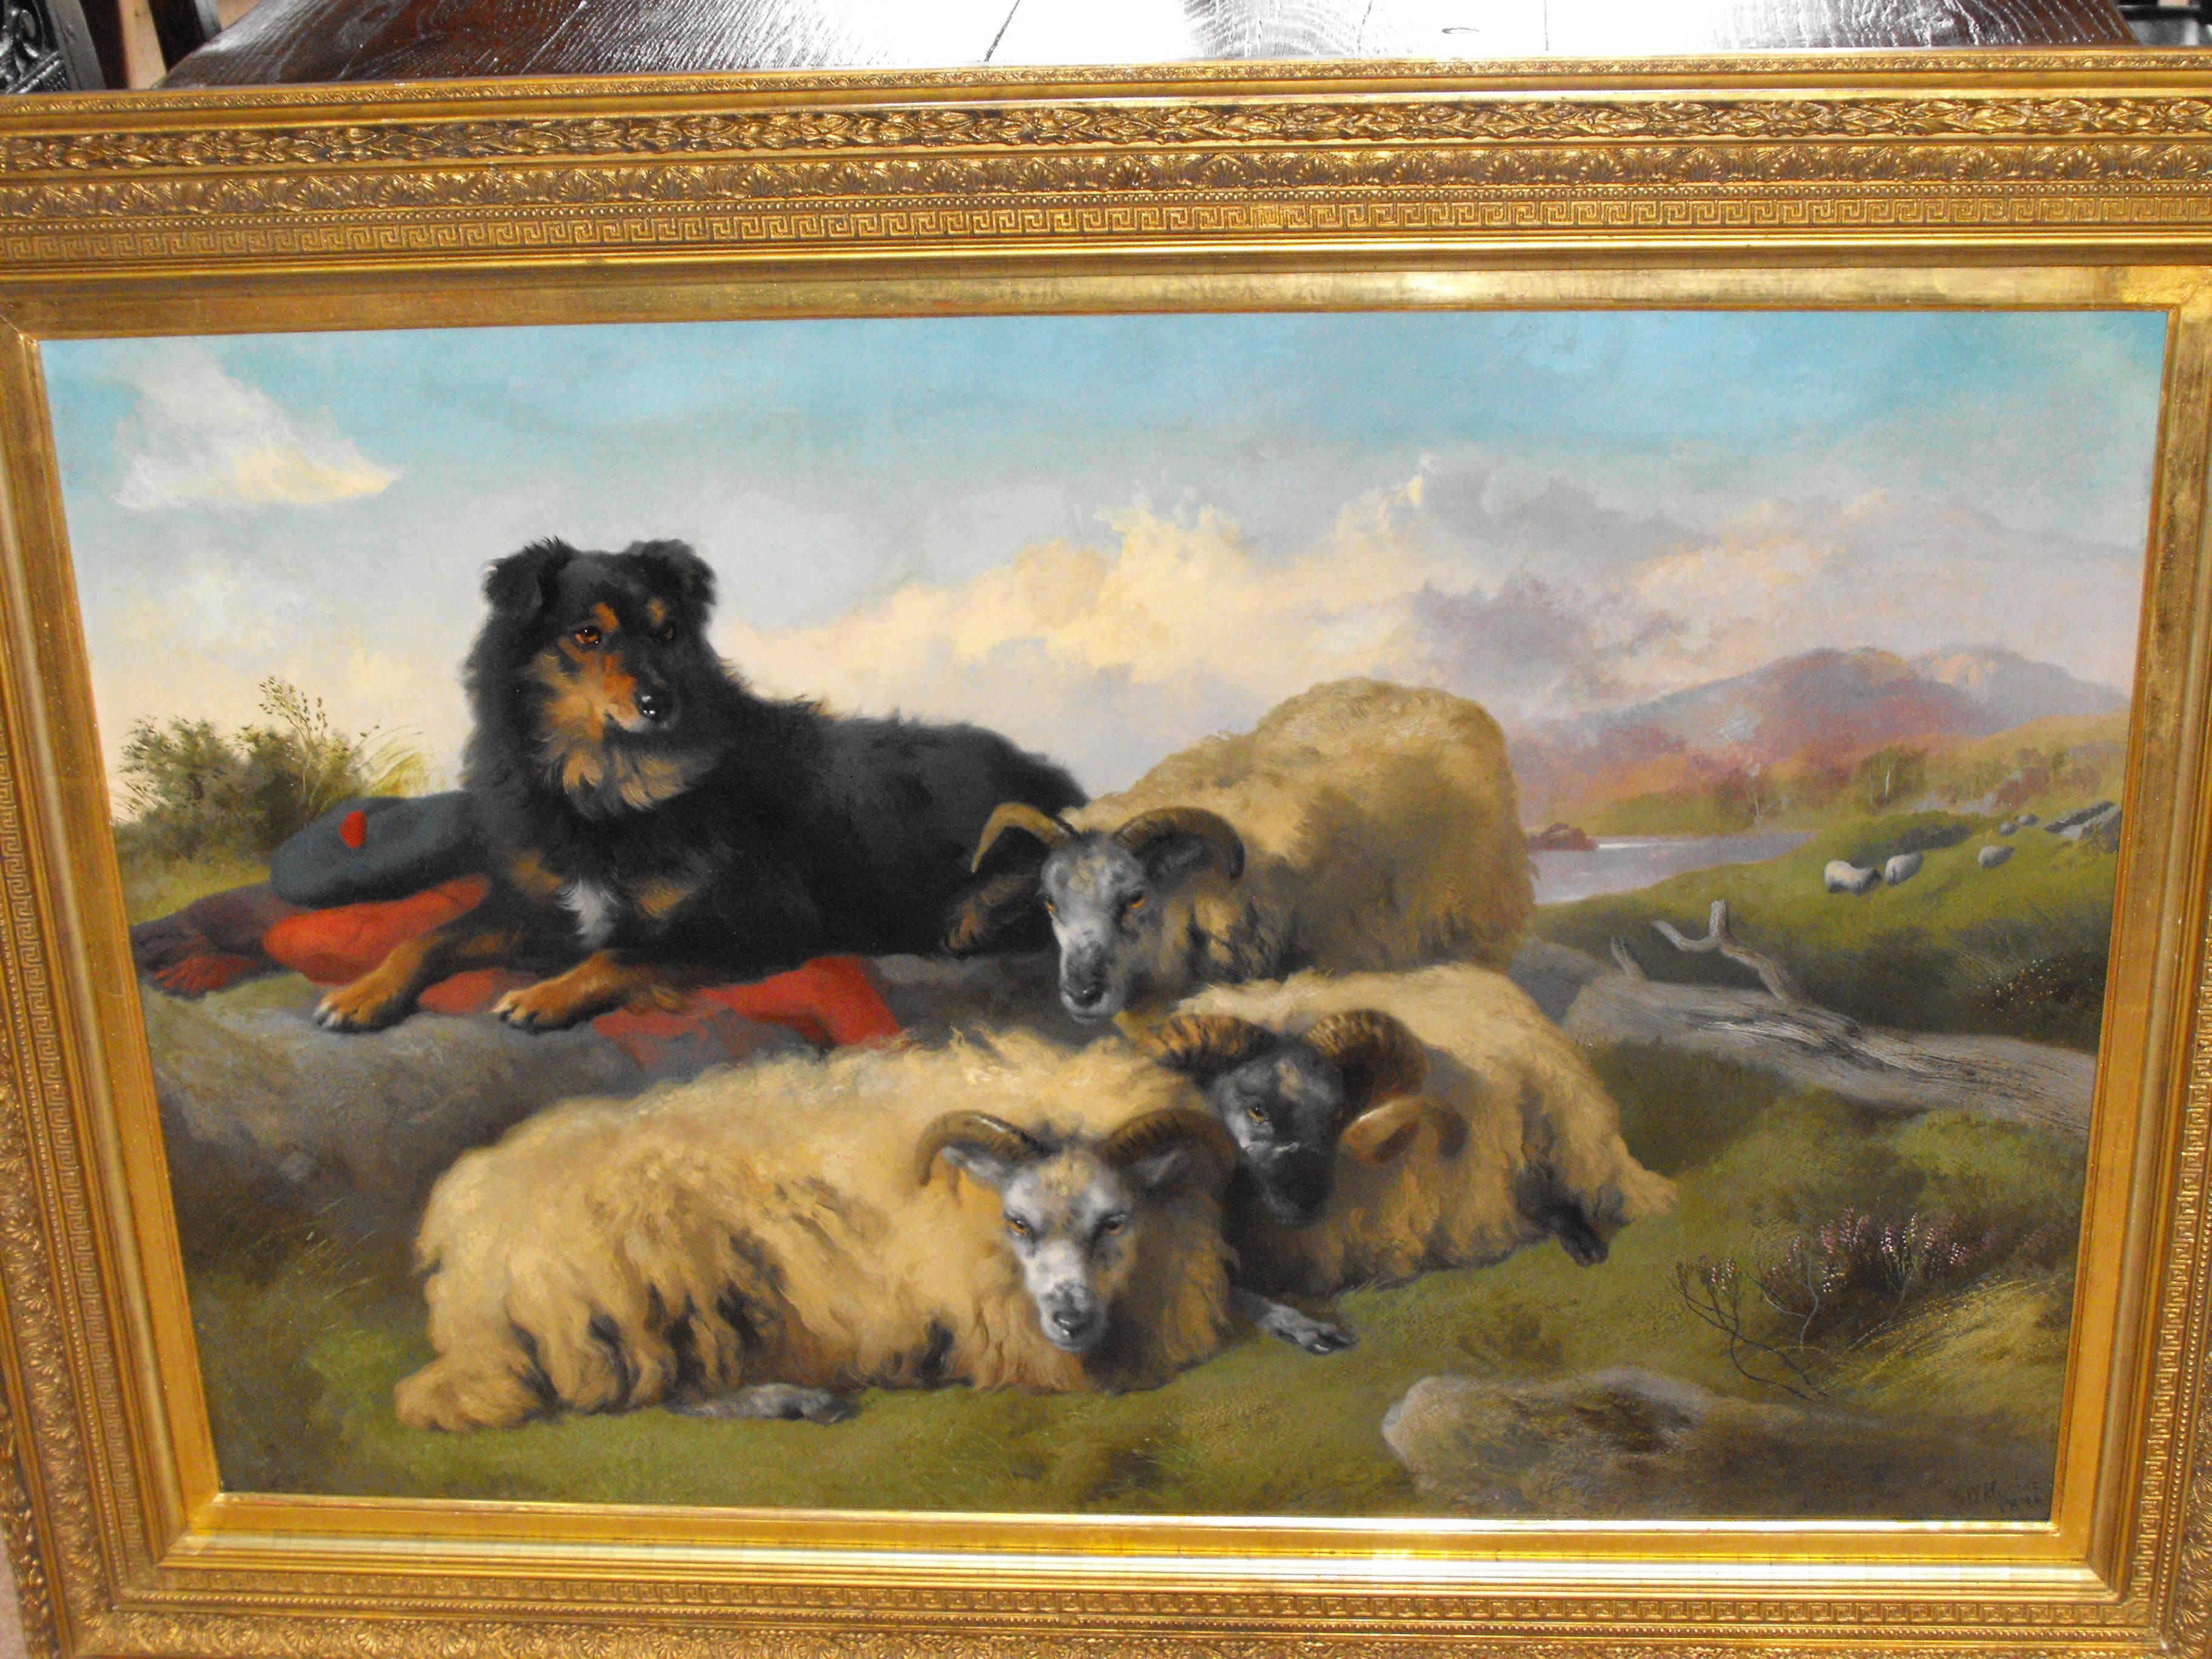 Antique Victorian oil painting landscape of sheep and sheep dog by Holgor 1870 - Brown Landscape Painting by George William Horlor